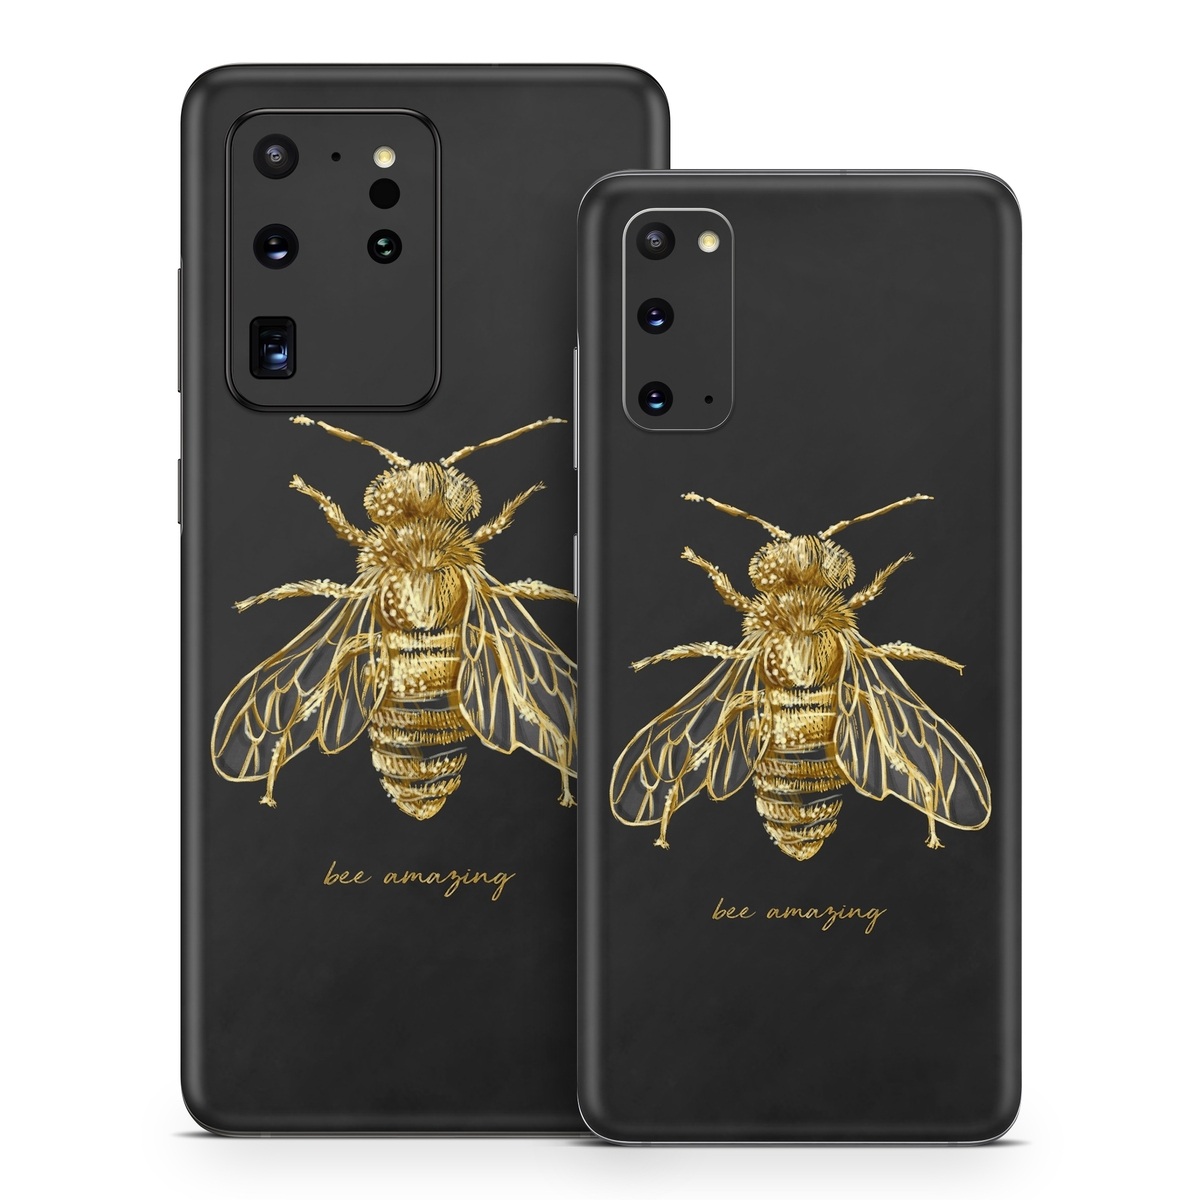 Samsung Galaxy S20 Series Skin design of Insect, Invertebrate, Membrane-winged insect, Arthropod, Pest, Net-winged insects, Bee, Cicada, Macro photography, Pollinator, with black, yellow, white colors